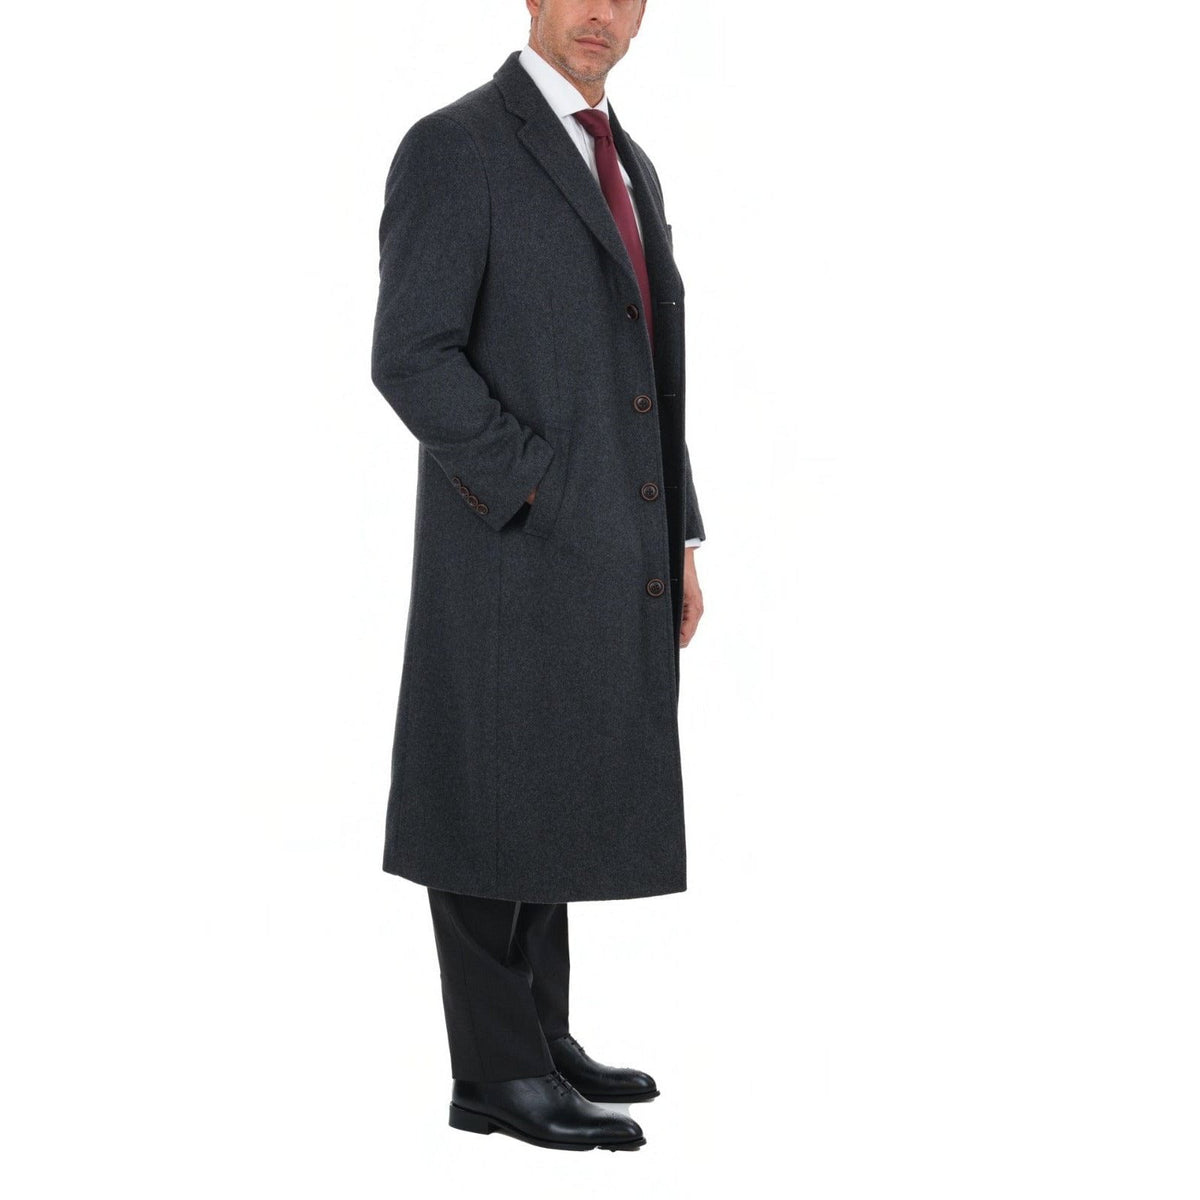 Arthur Black OUTERWEAR Mens Regular Fit Solid Charcoal Gray Full Length Wool Cashmere Overcoat Top Coat